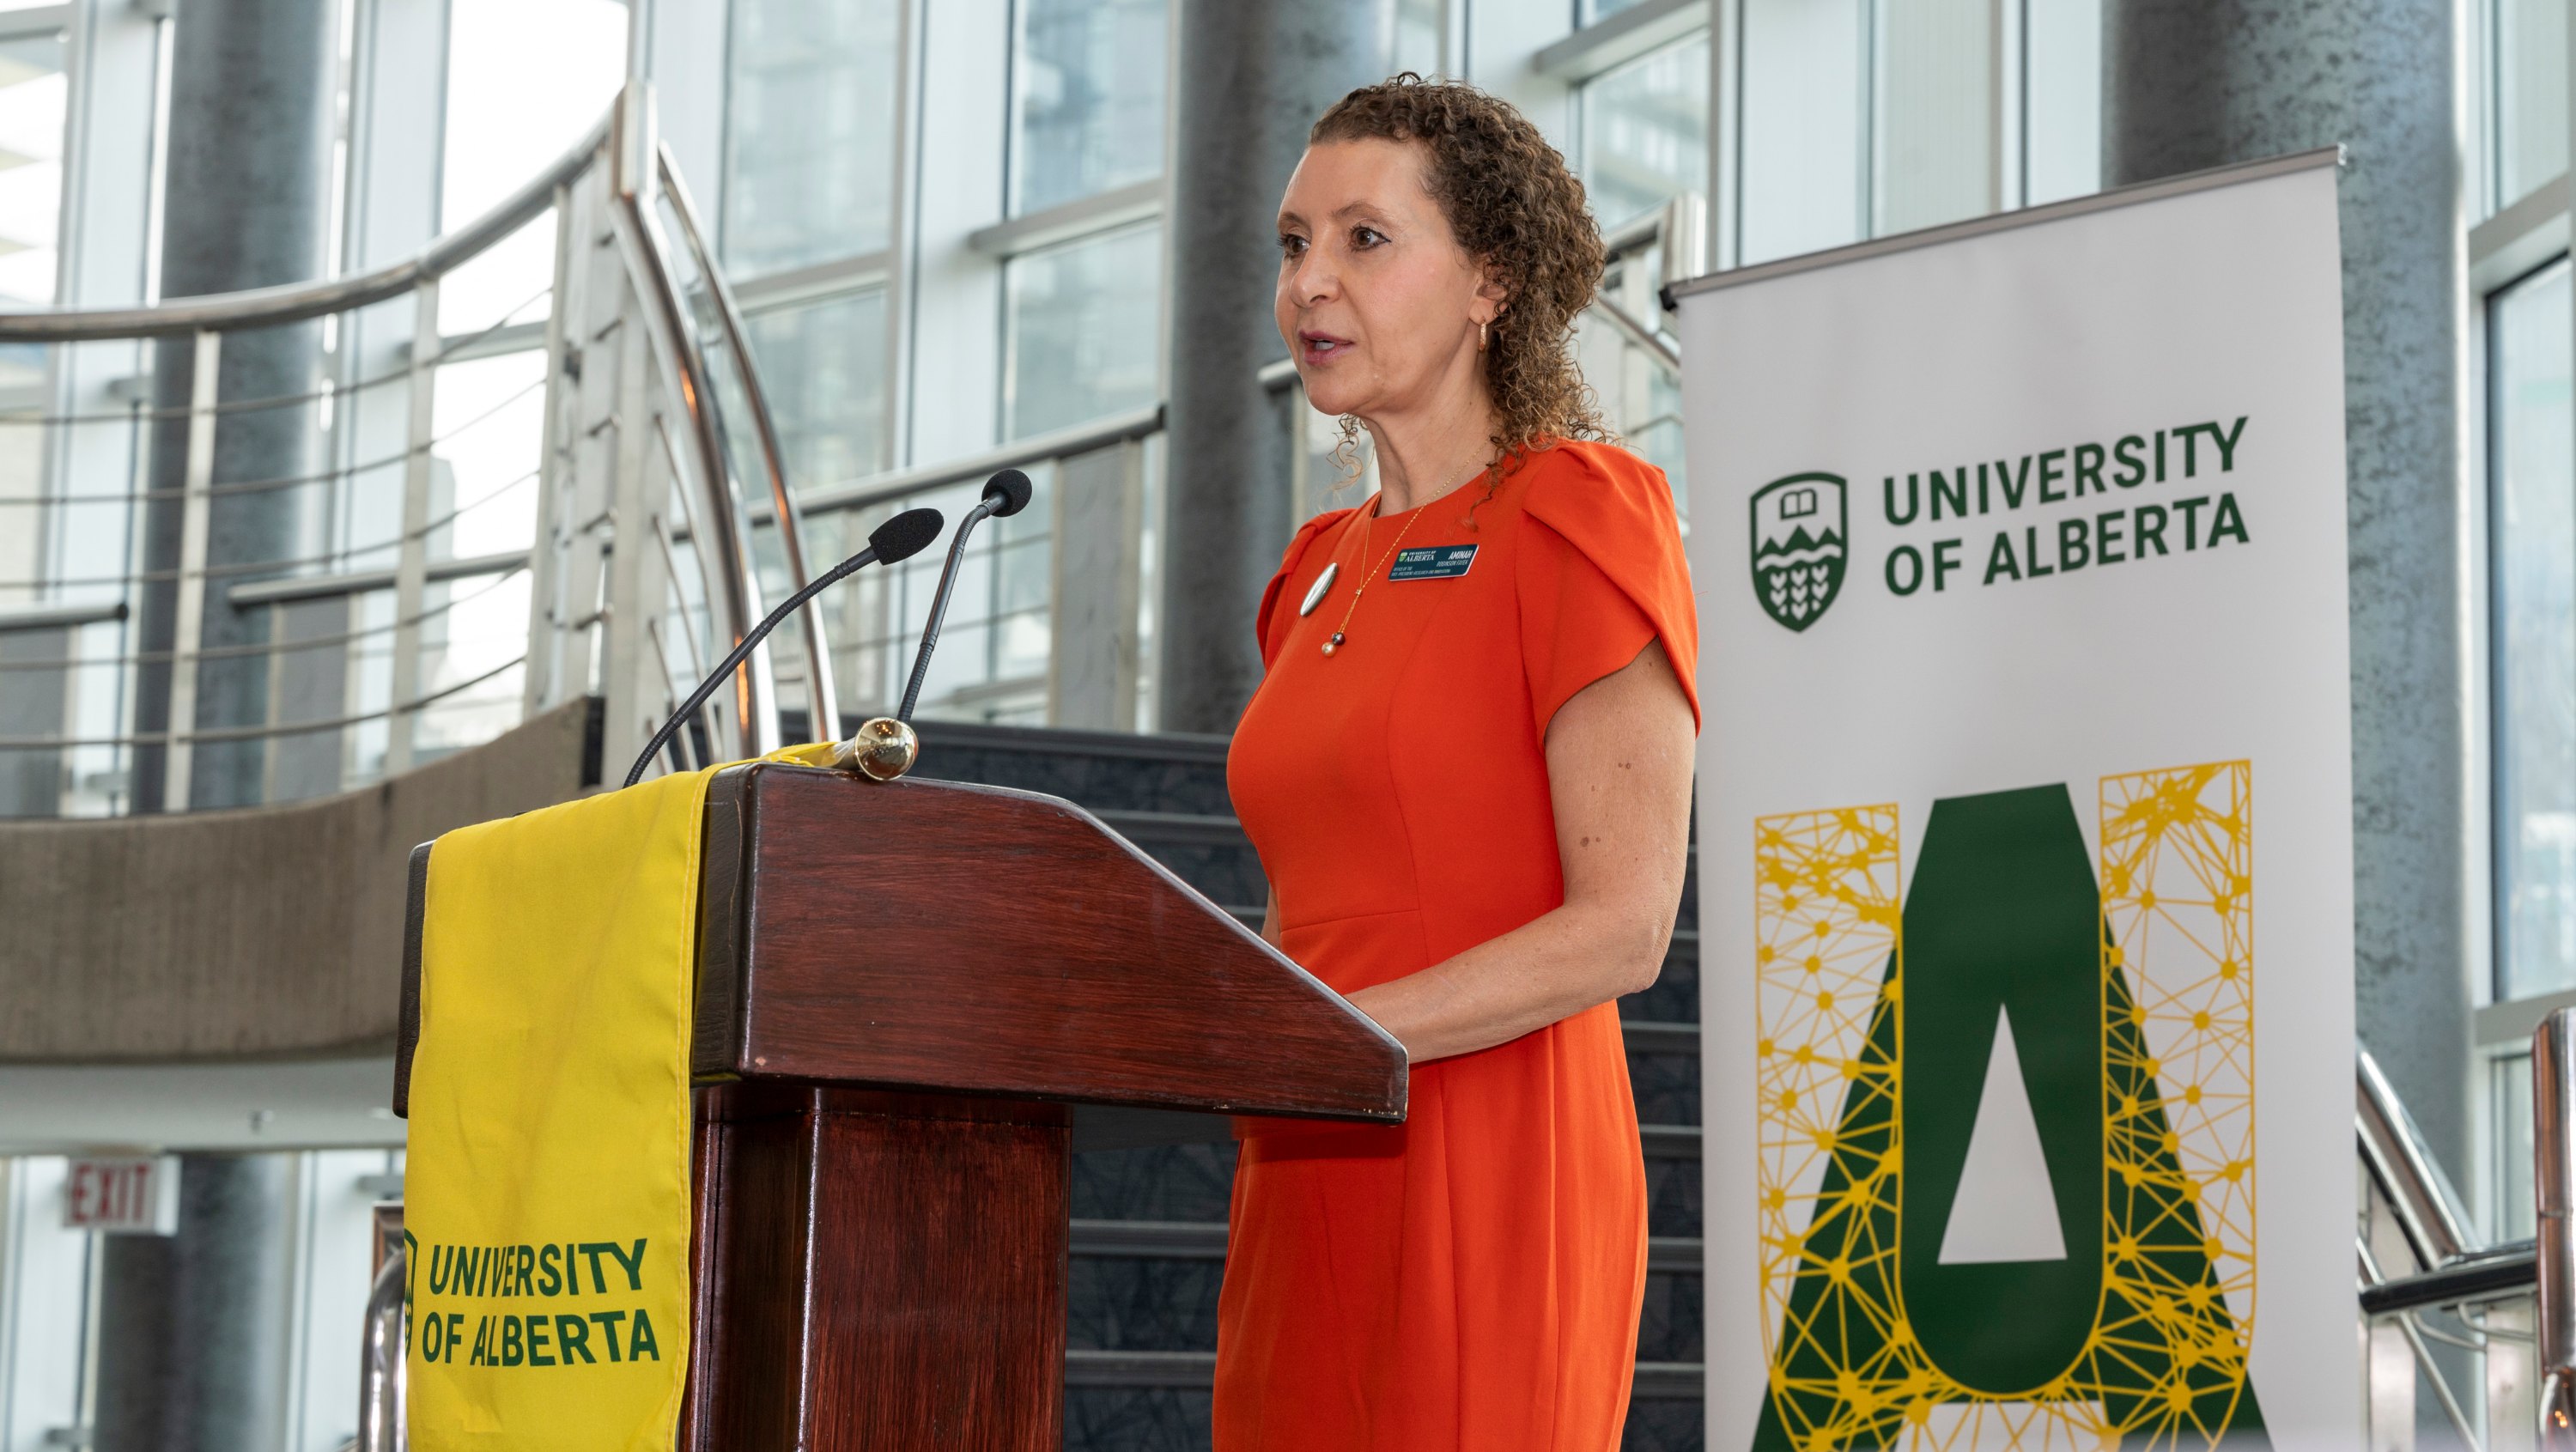 Aminah Robinson Fayek, U of A vice-president (research and innovation) speaks at a podium during the launch of the university's Strategic Plan for Research and Innovation.